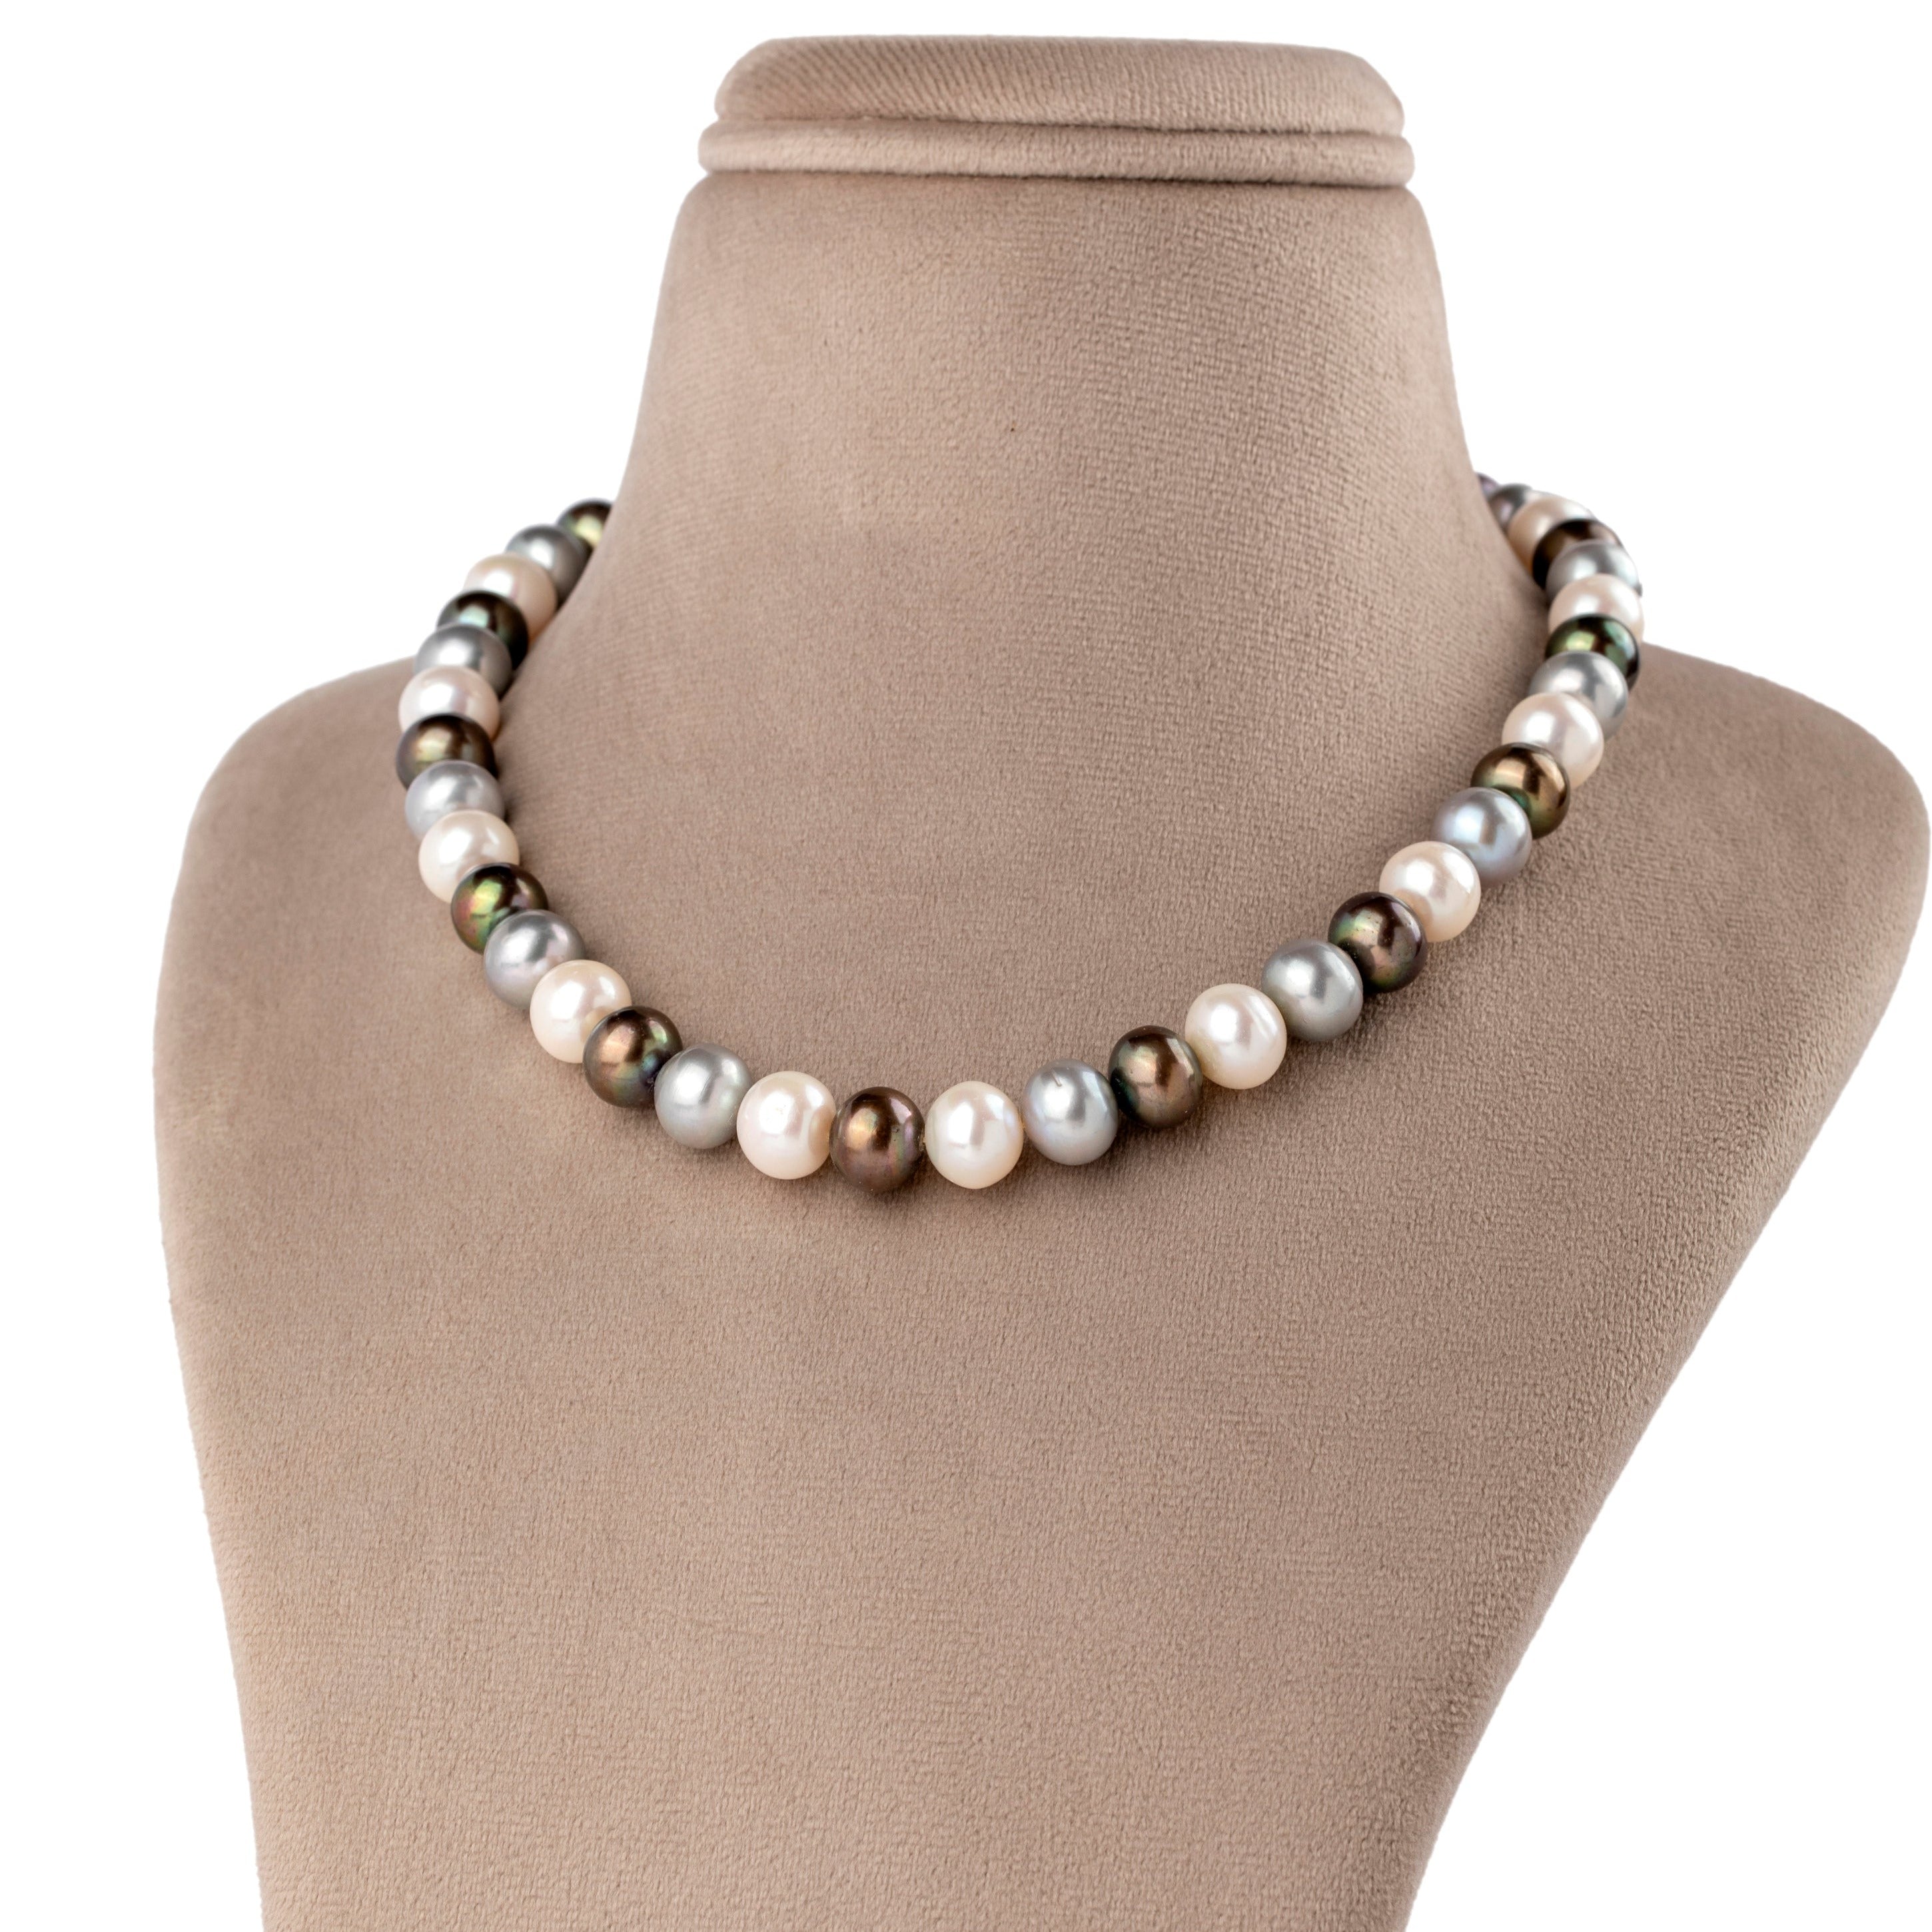 Chromatic Freshwater Pearl Necklace